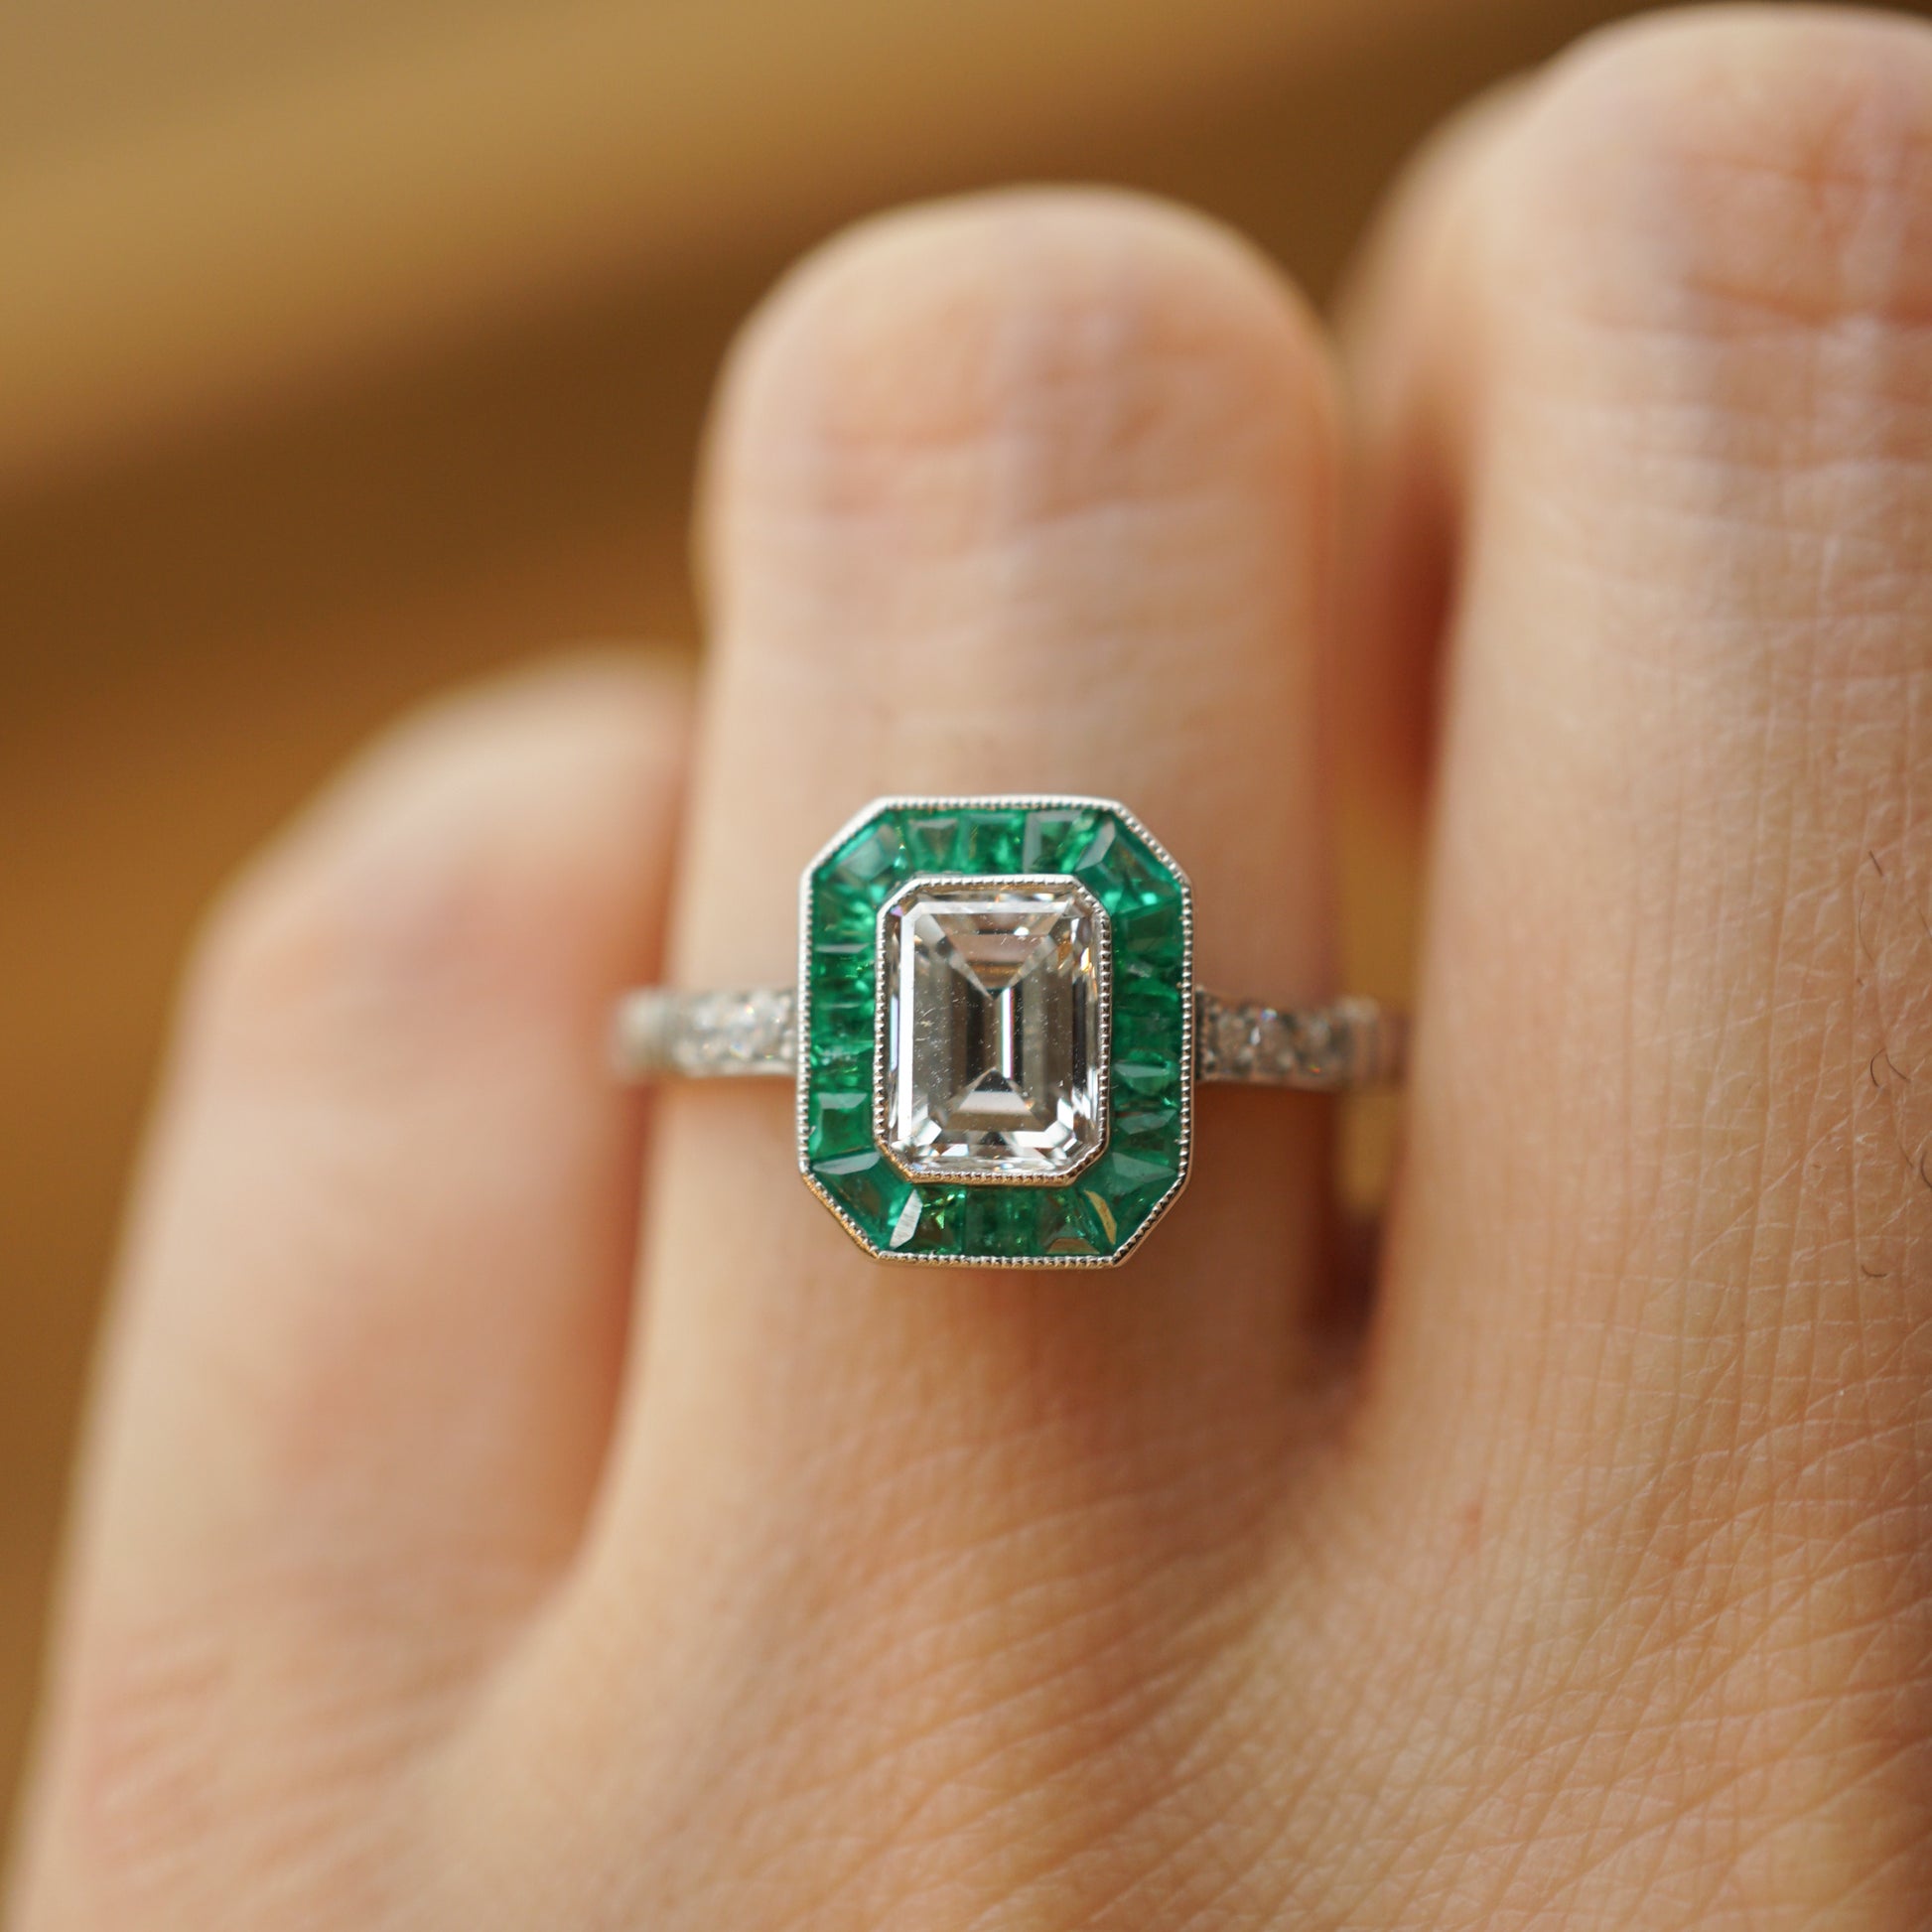 .74 Emerald Cut Diamond & Emerald Engagement Ring in PlatinumComposition: Platinum Ring Size: 6.5 Total Diamond Weight: .80ct Total Gram Weight: 4.2 g